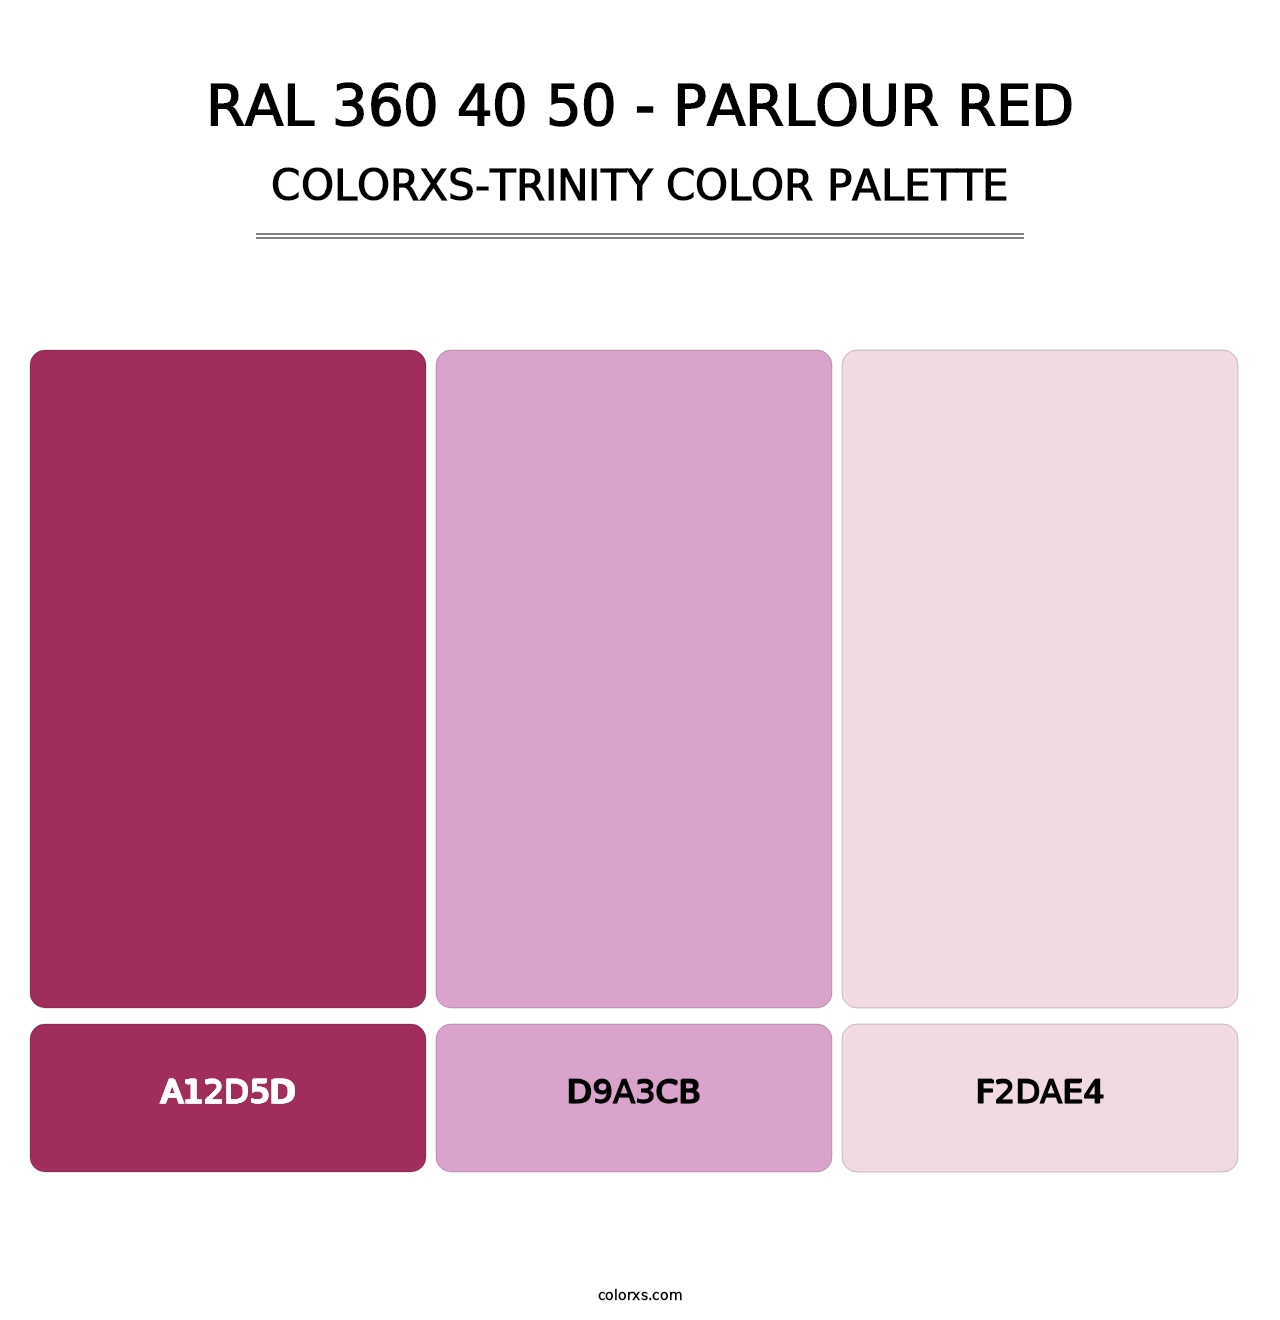 RAL 360 40 50 - Parlour Red - Colorxs Trinity Palette